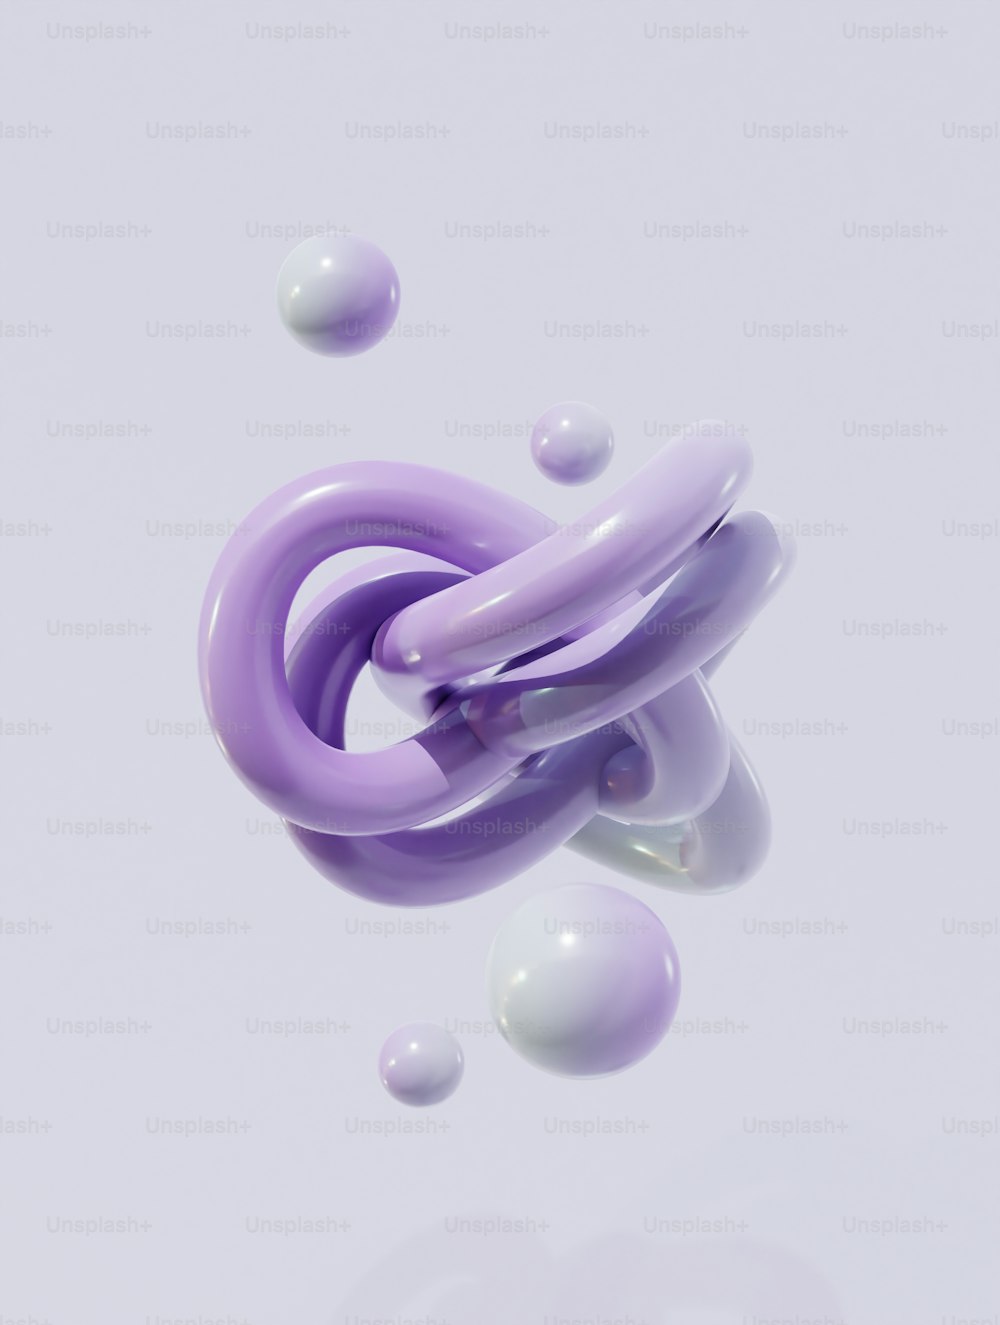 a purple and white object floating in the air